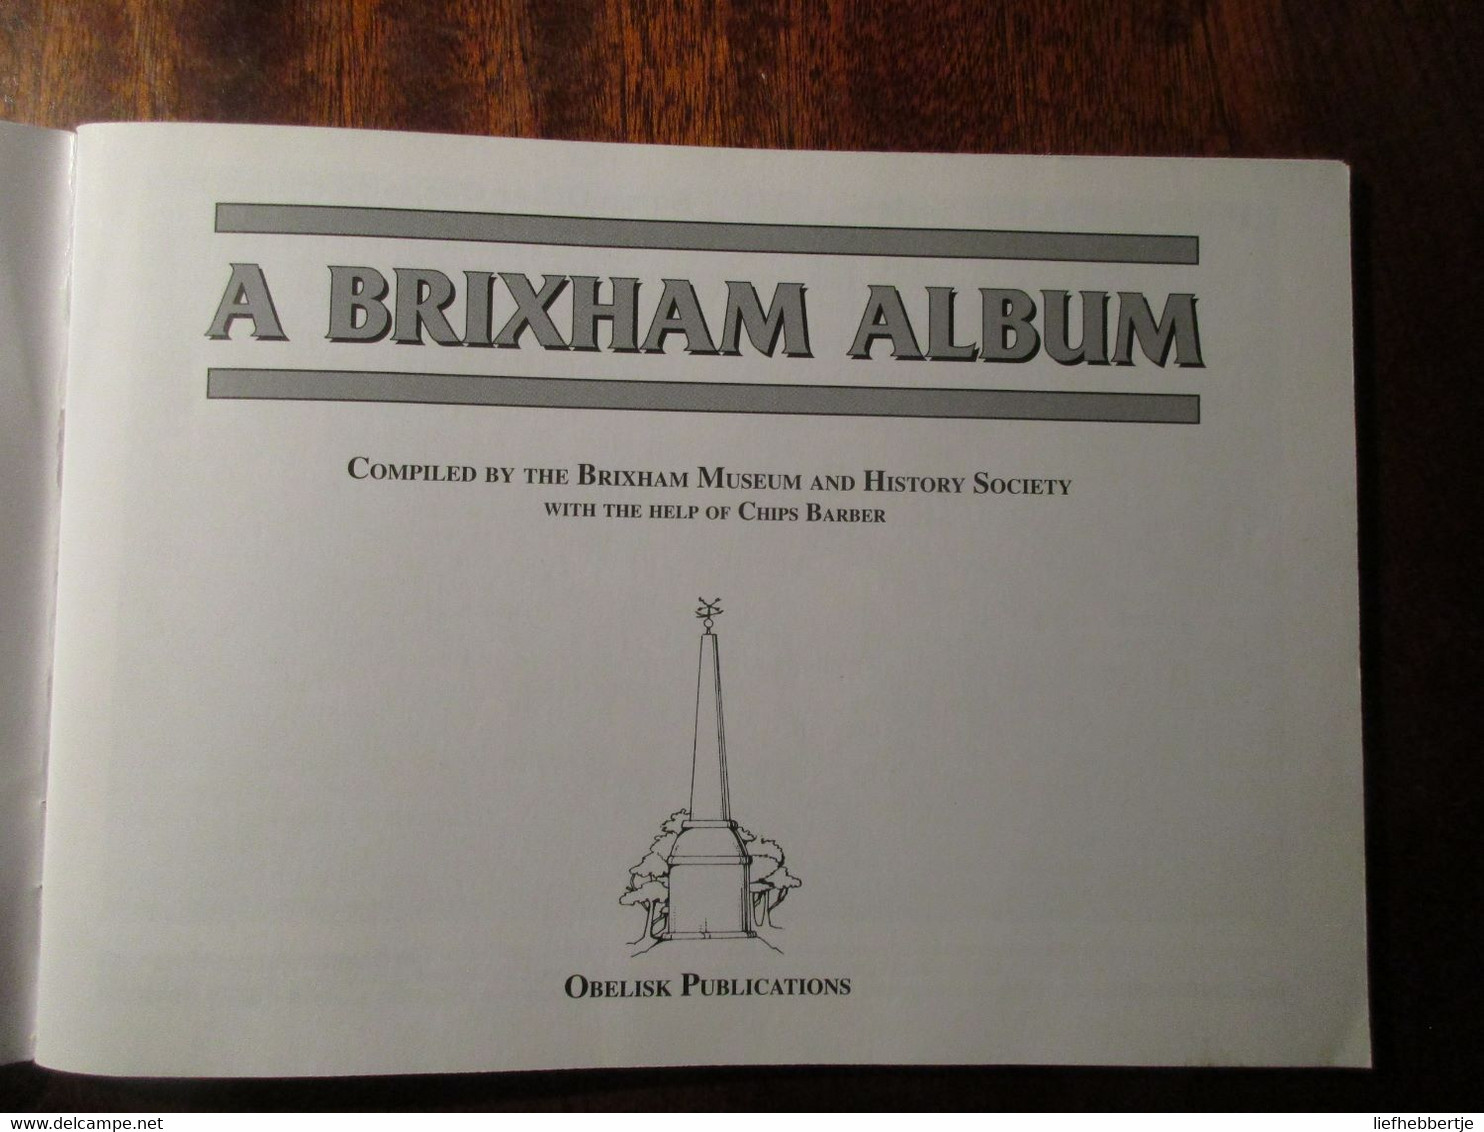 A Brixham Album - Compiled By The Brixham Museum And History Society - Obelisk Publications - 1994 - Europe